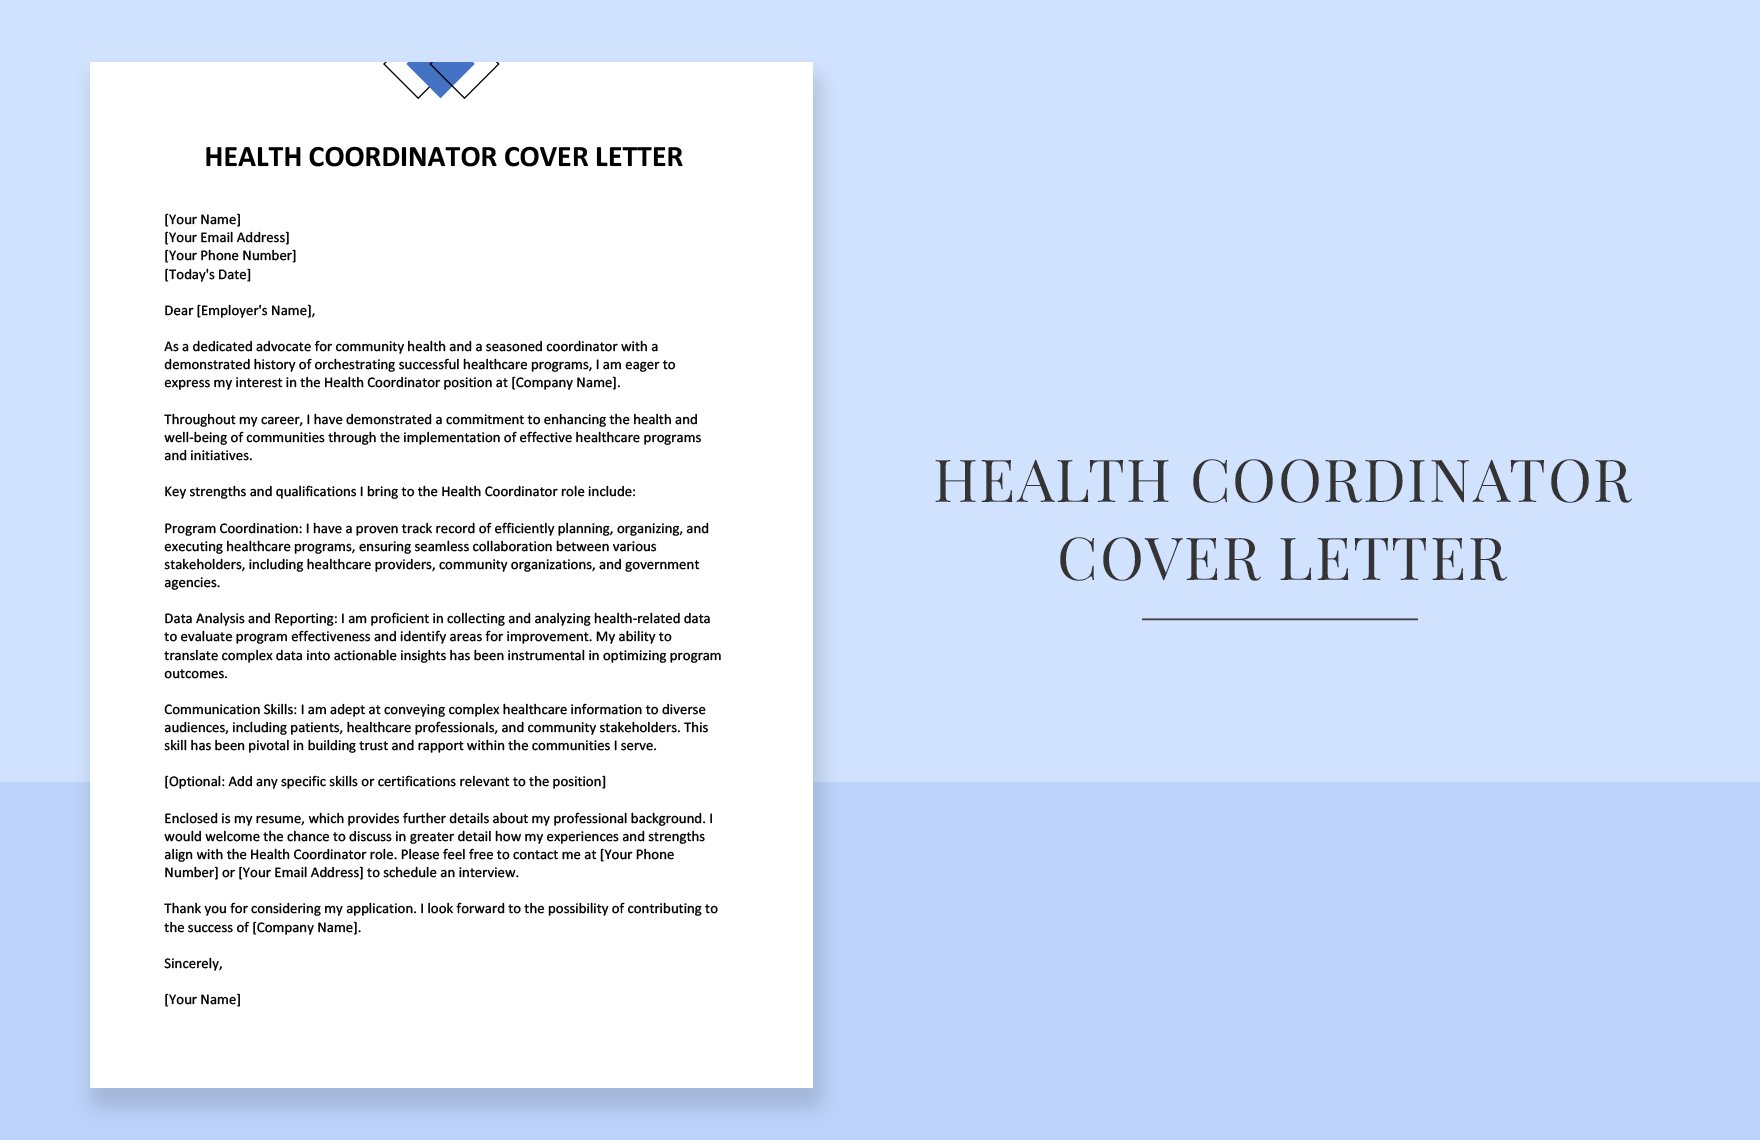 Health Coordinator Cover Letter in Word, Google Docs